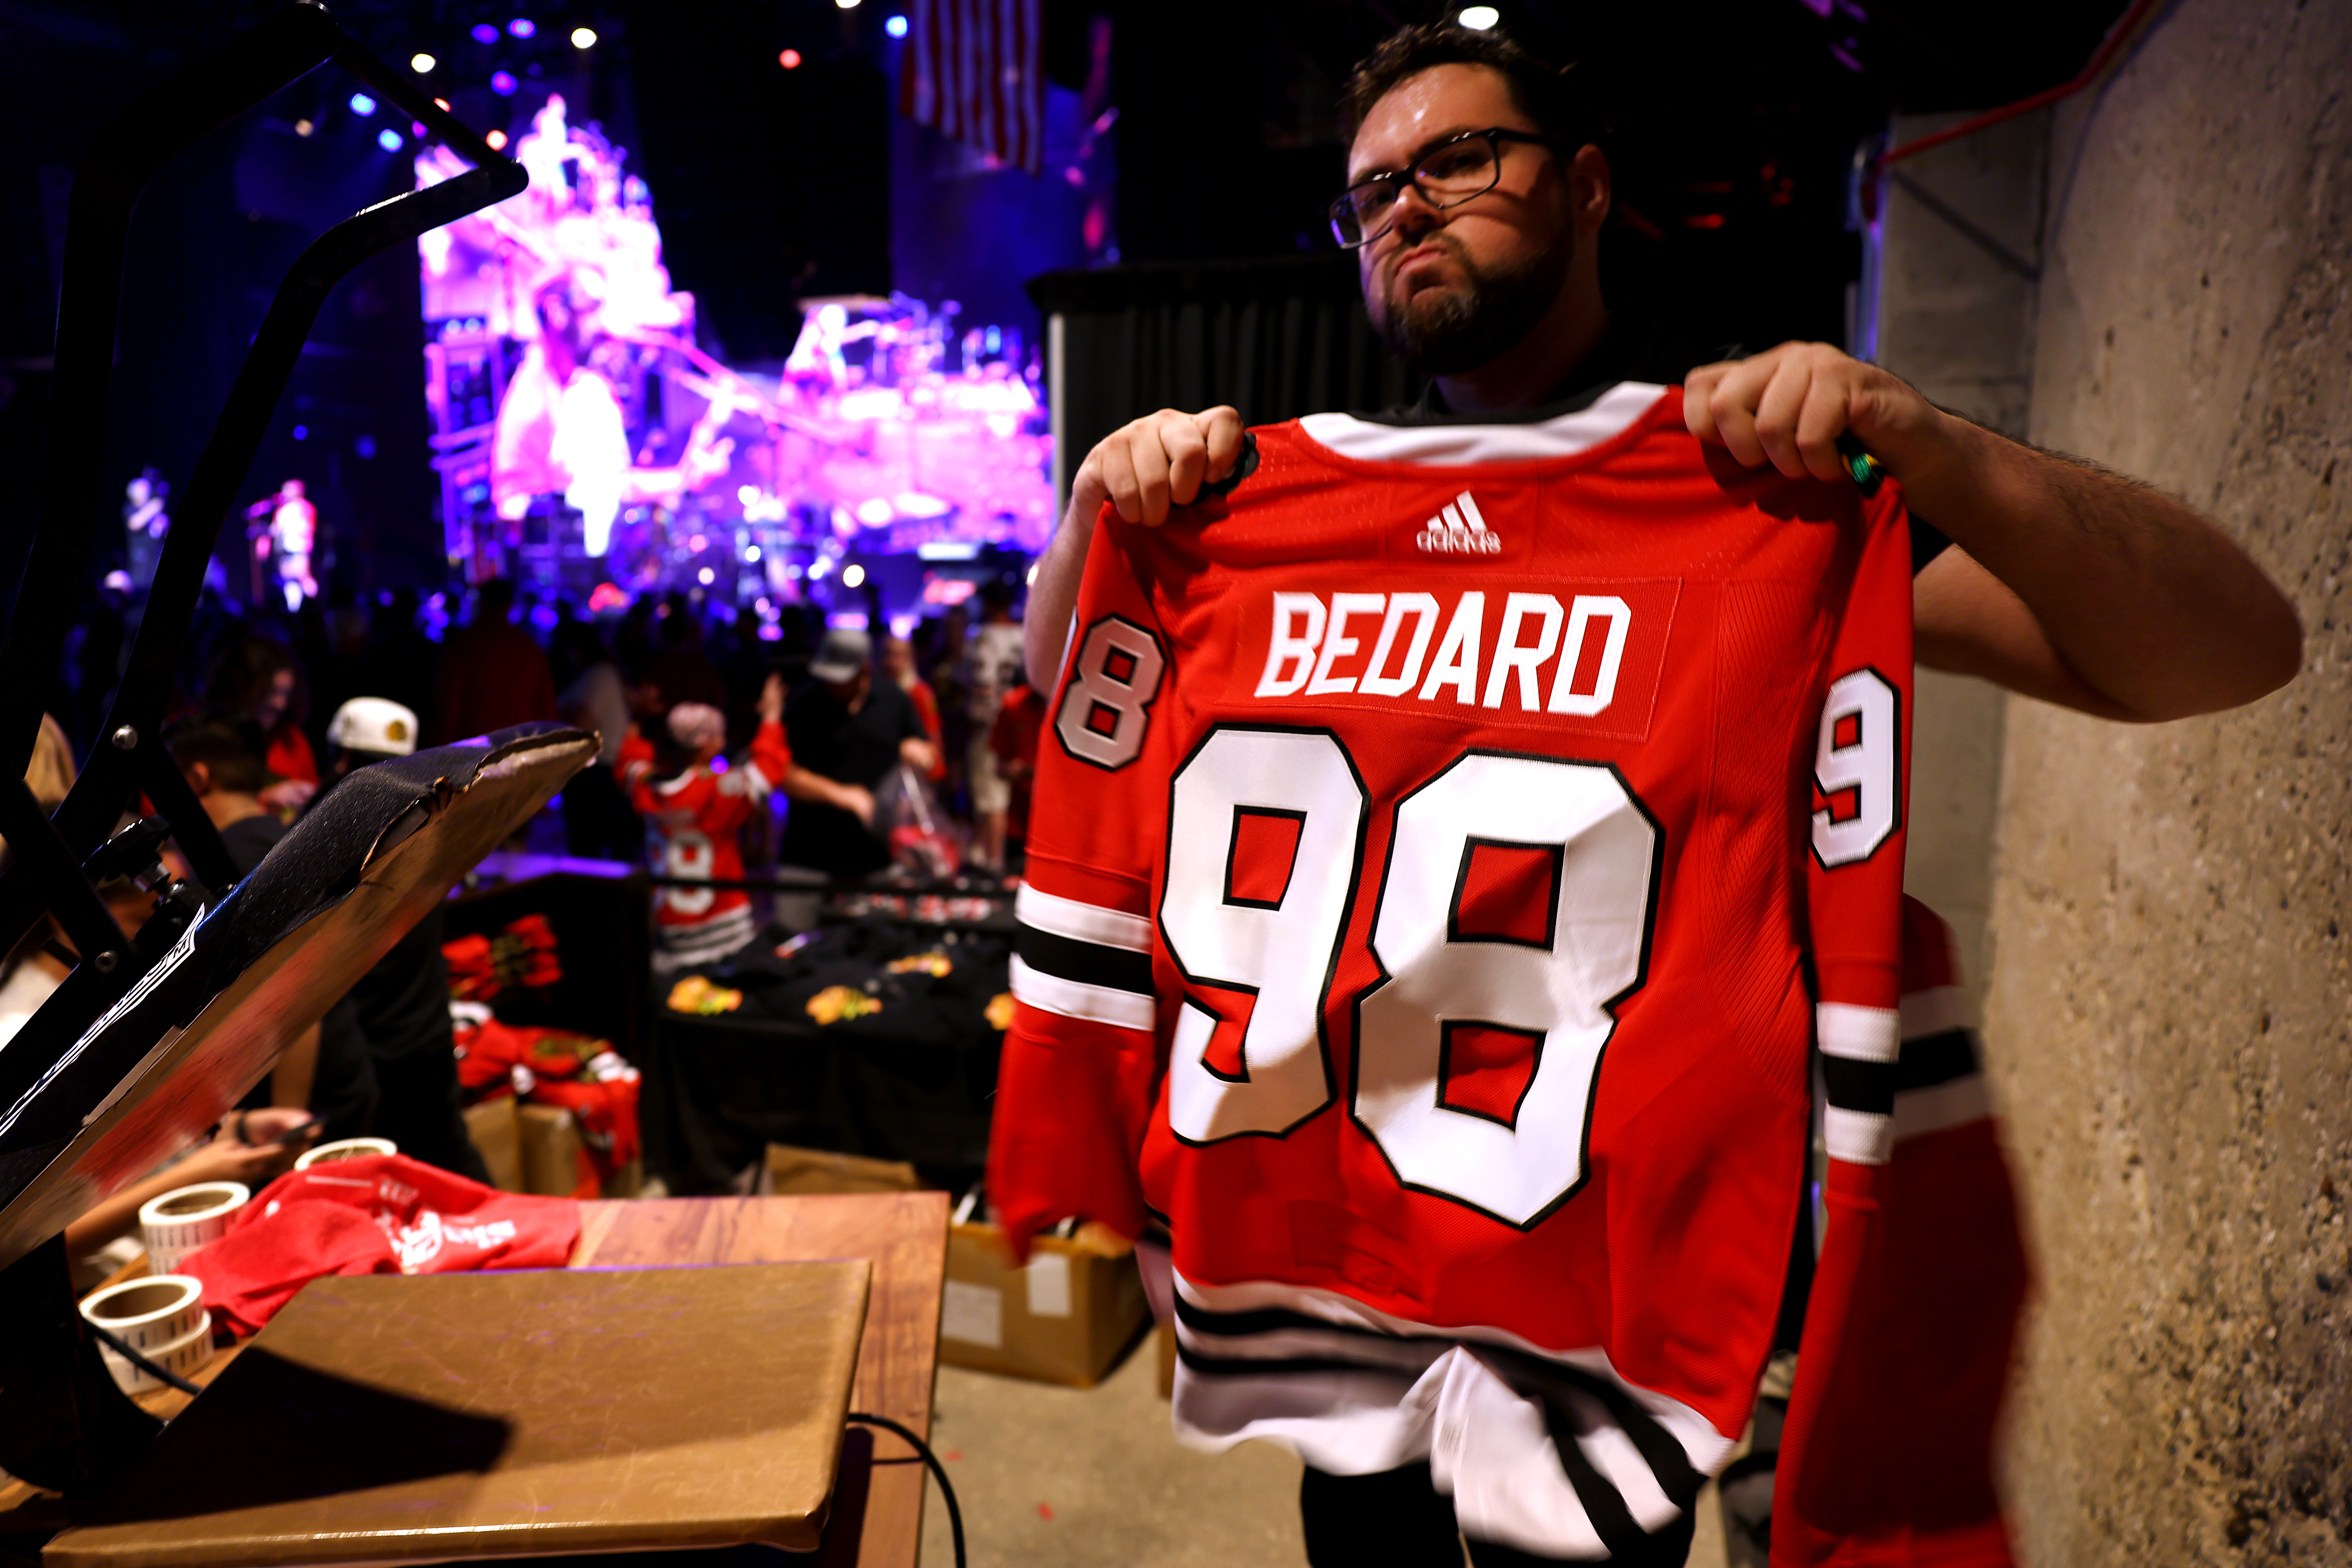 Connor Bedard jersey sales booming among Blackhawks fans, but